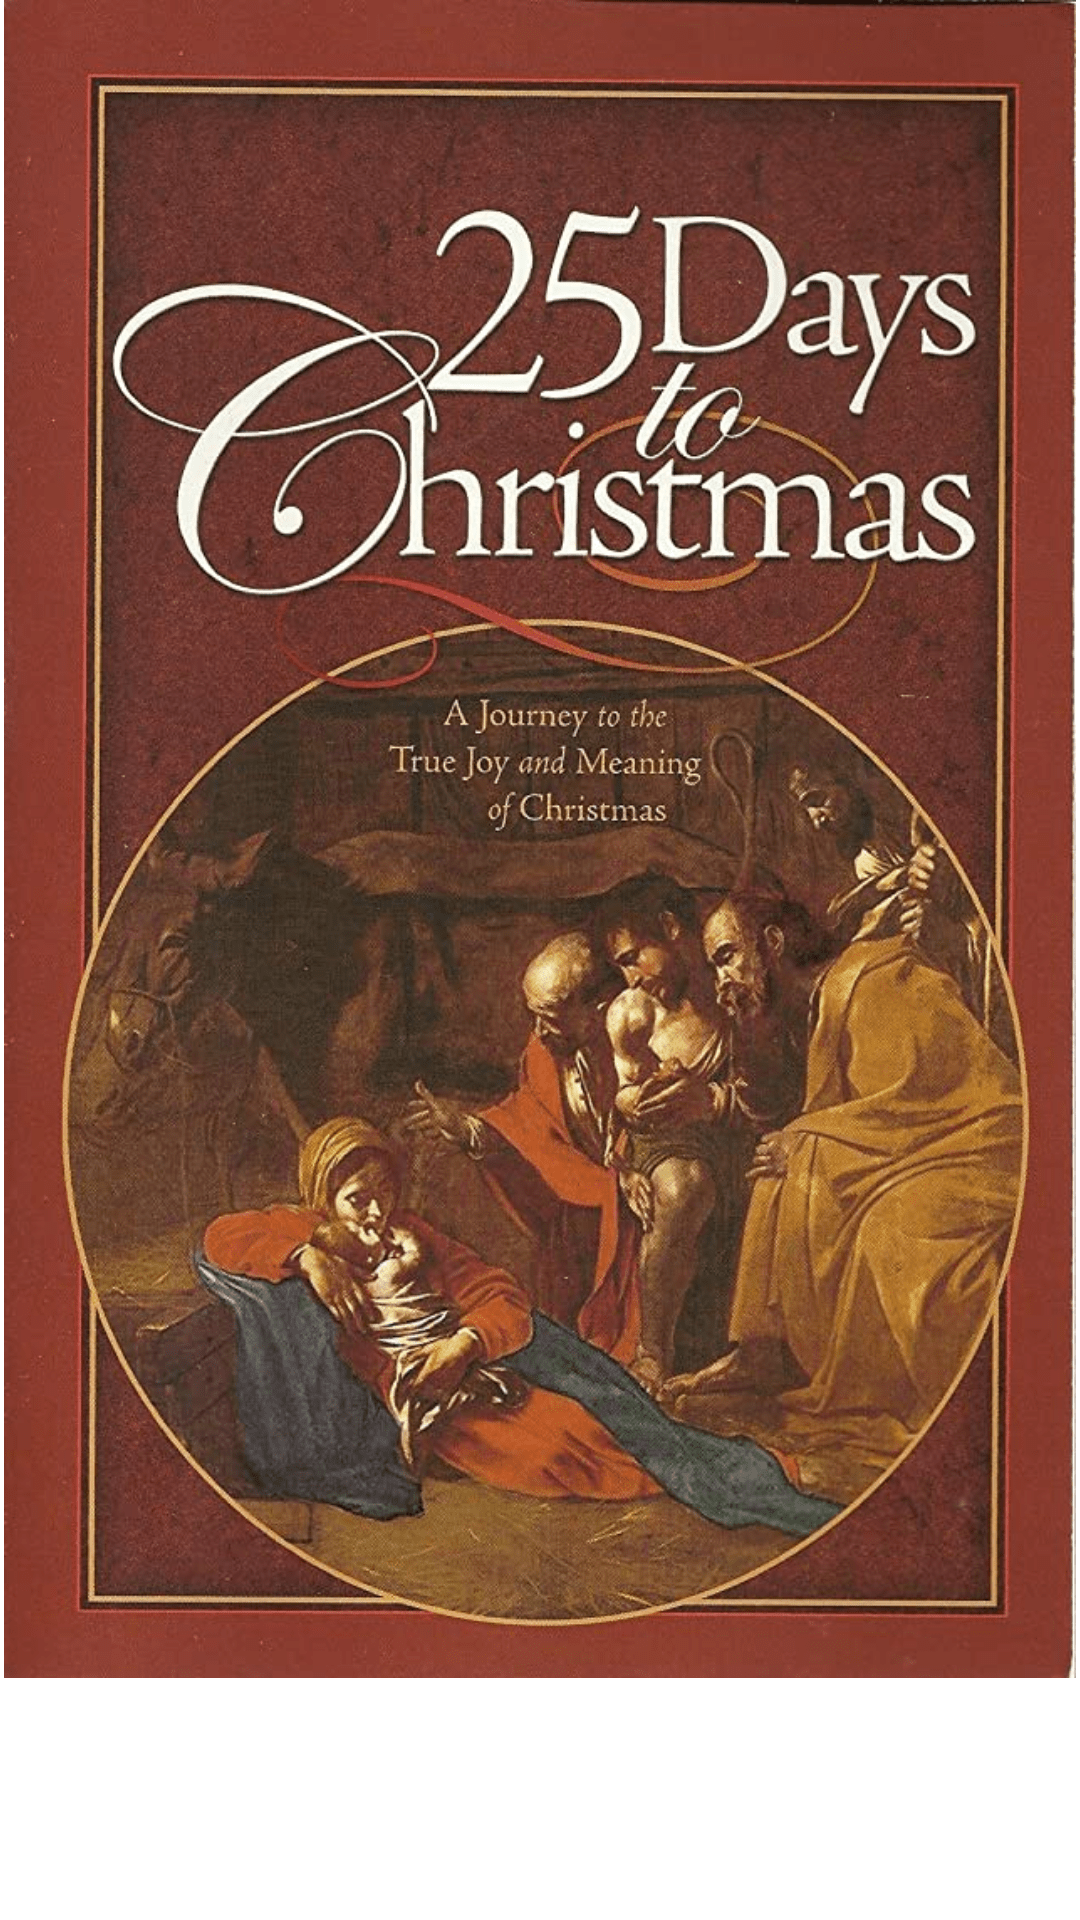 25 days to christmas: a journey to the true joy and meaning of christmas